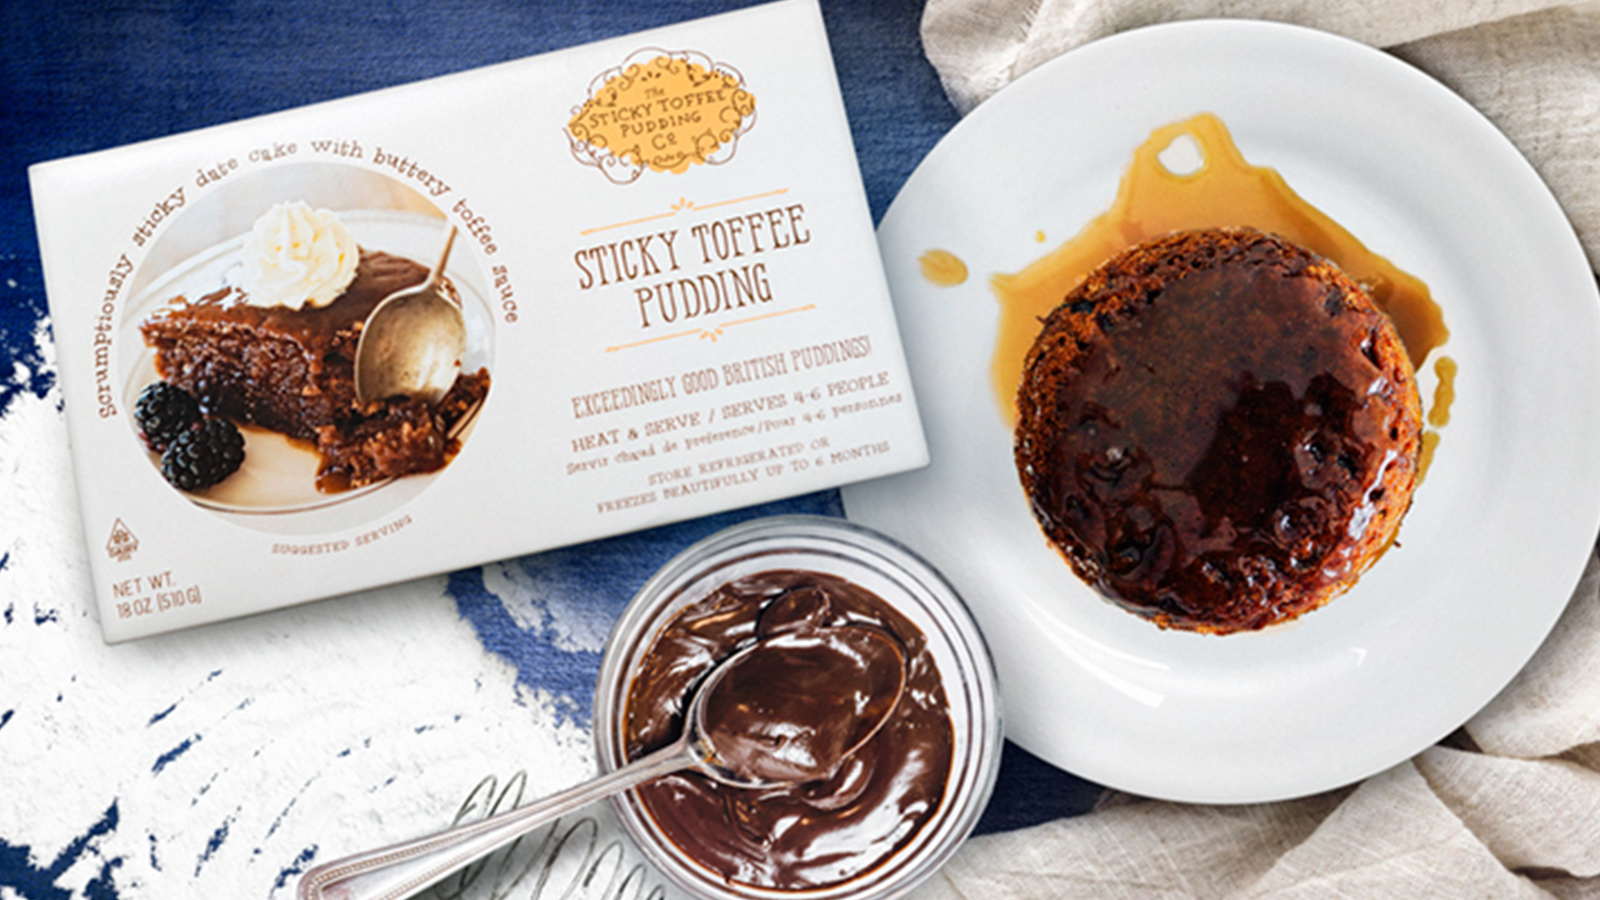 Mouthwatering Gourmet Sweet Packaging: The Sticky Toffee Pudding Story